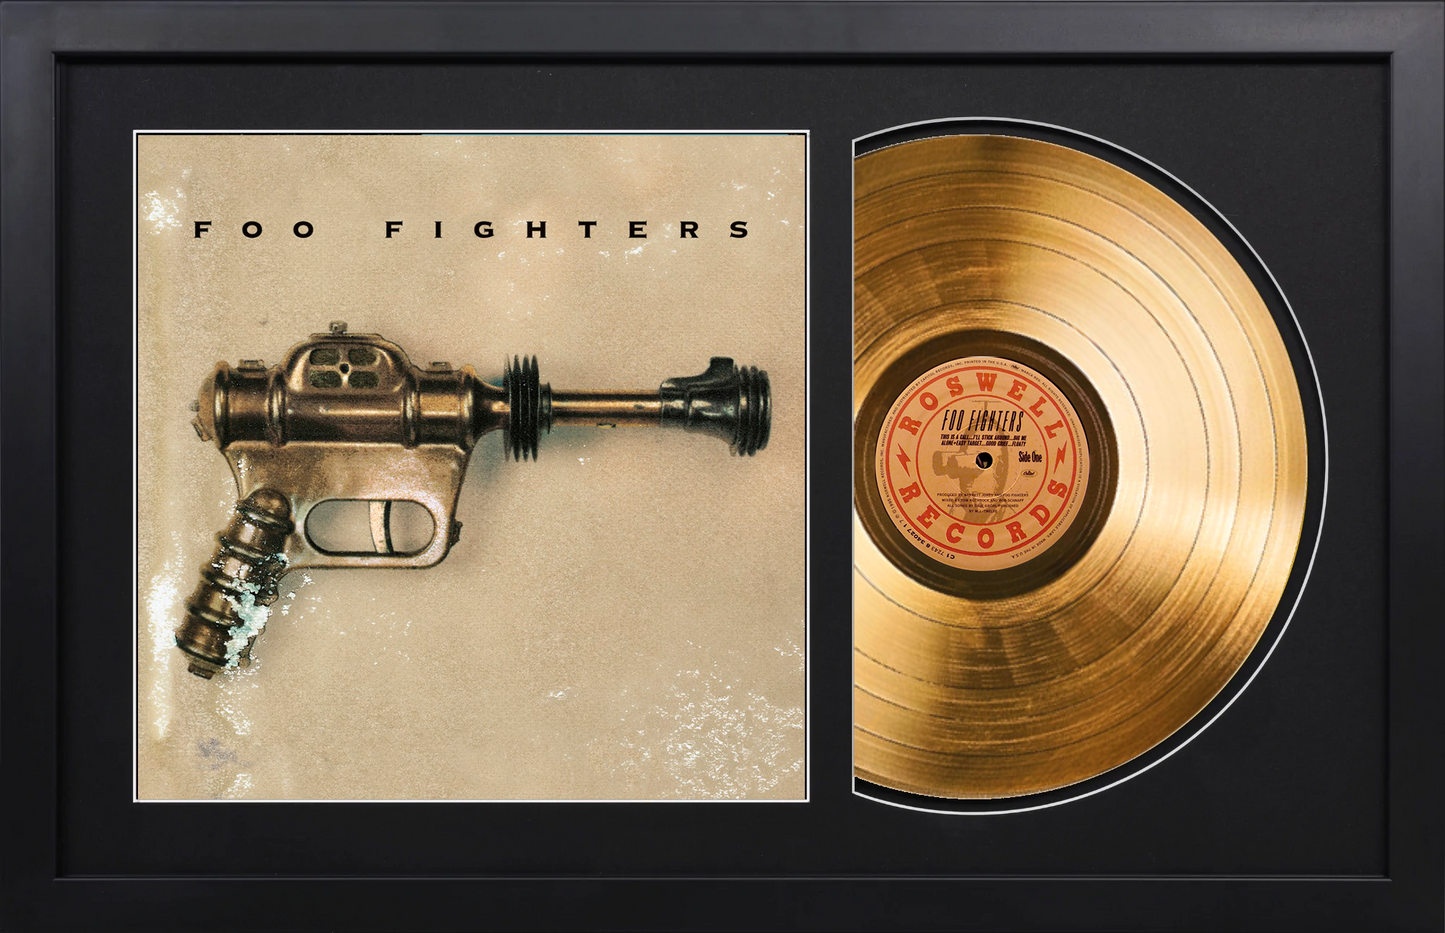 Foo Fighters - Foo Fighters - 14K Gold Plated, Limited Edition Album